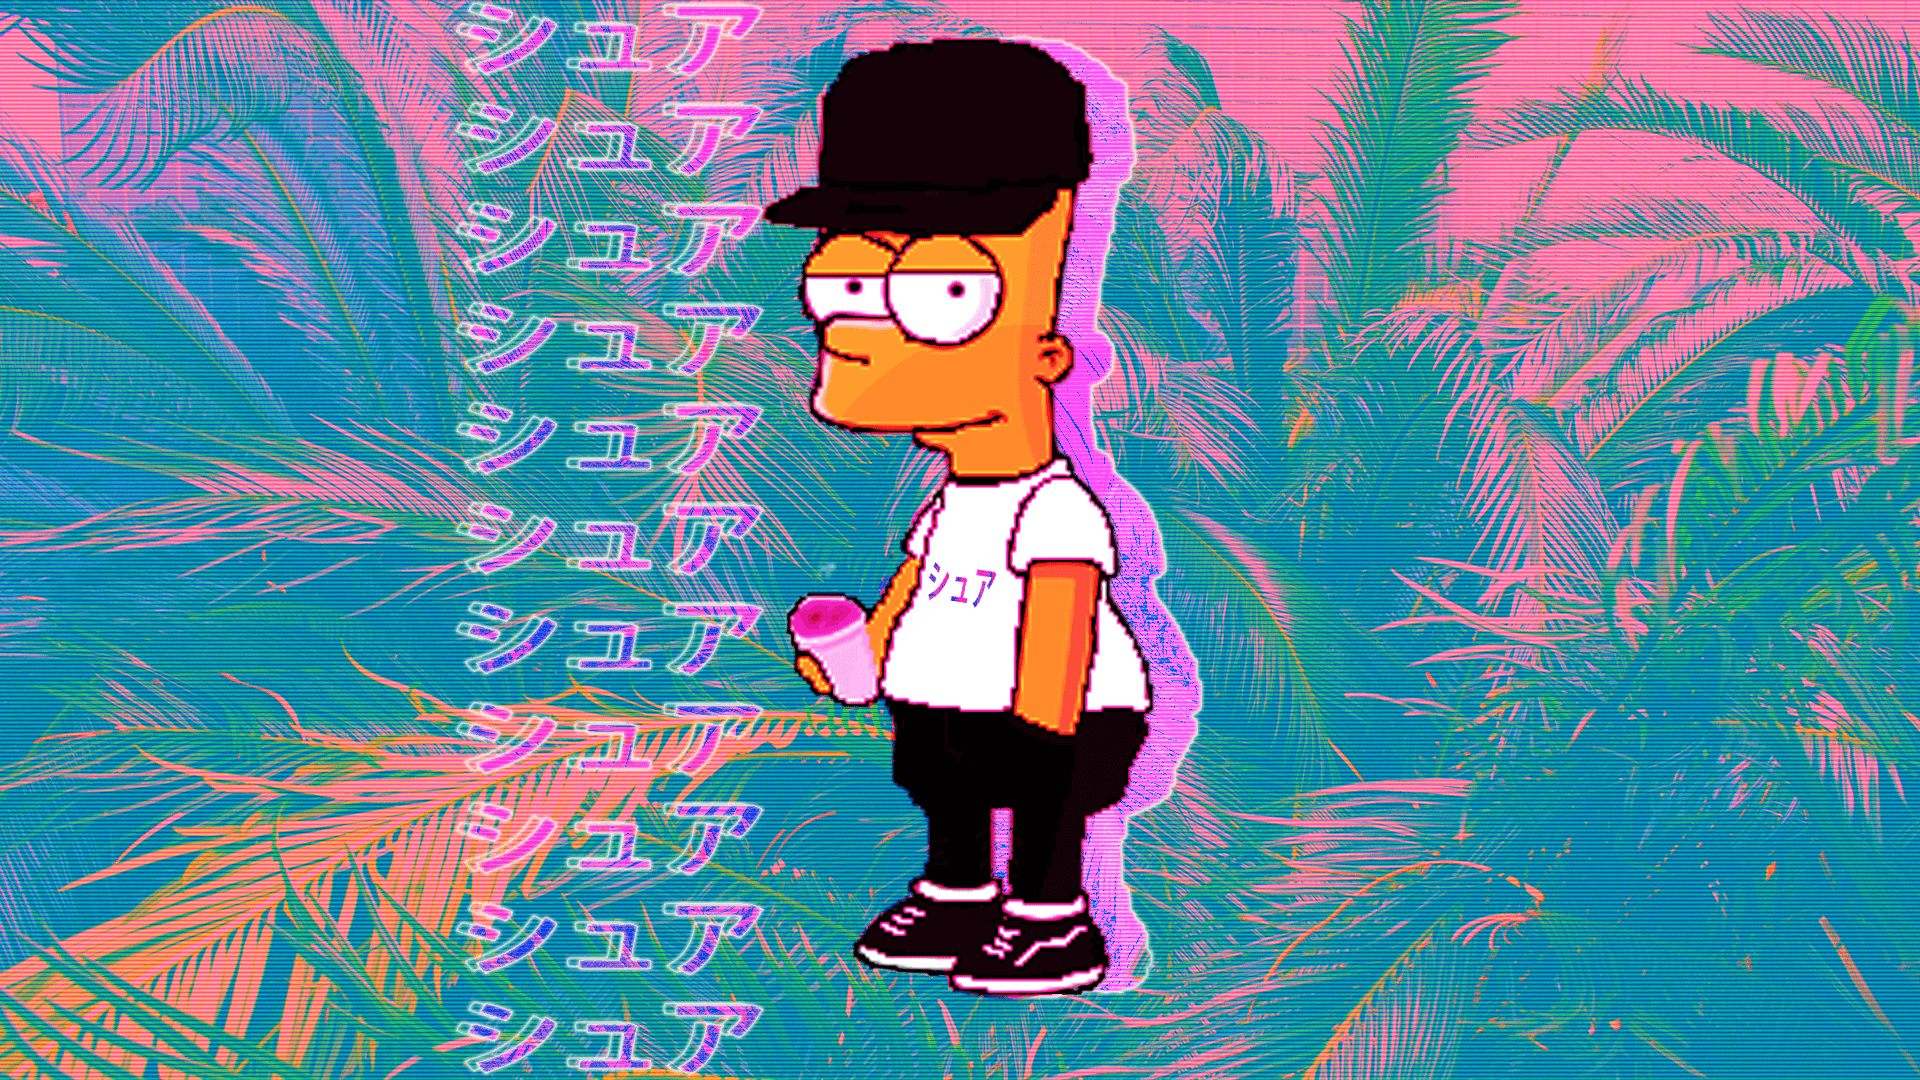 A cartoon character is standing in front of palm trees - The Simpsons, Bart Simpson